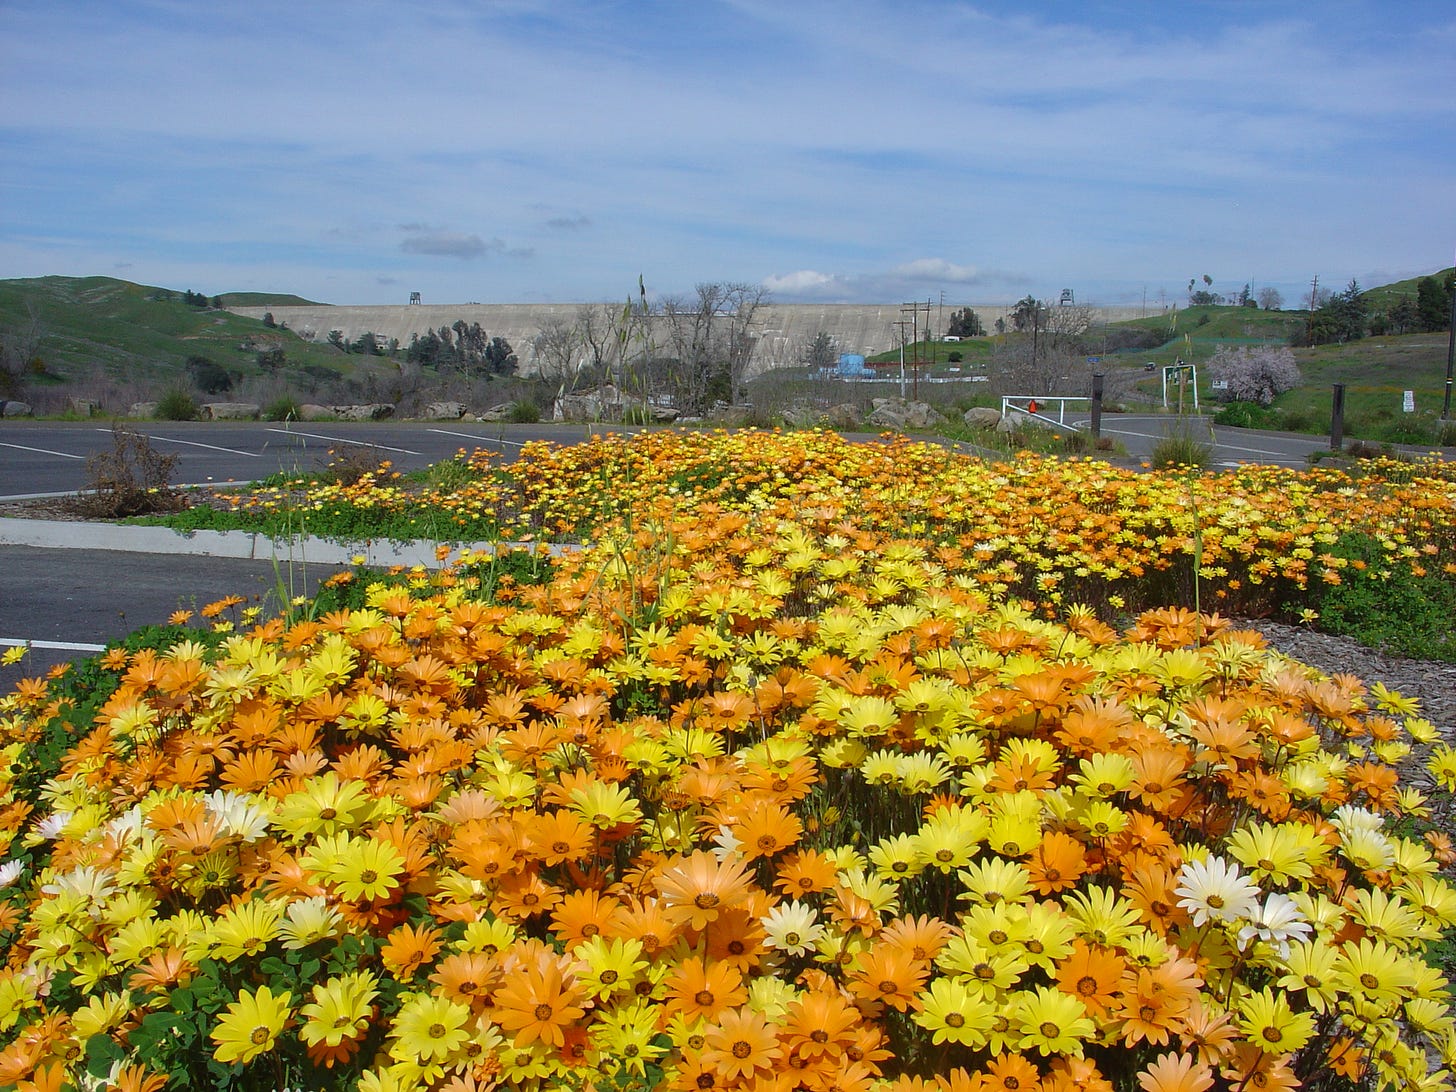 Clusters of yellow, orange, and white daisies in drab parking lot